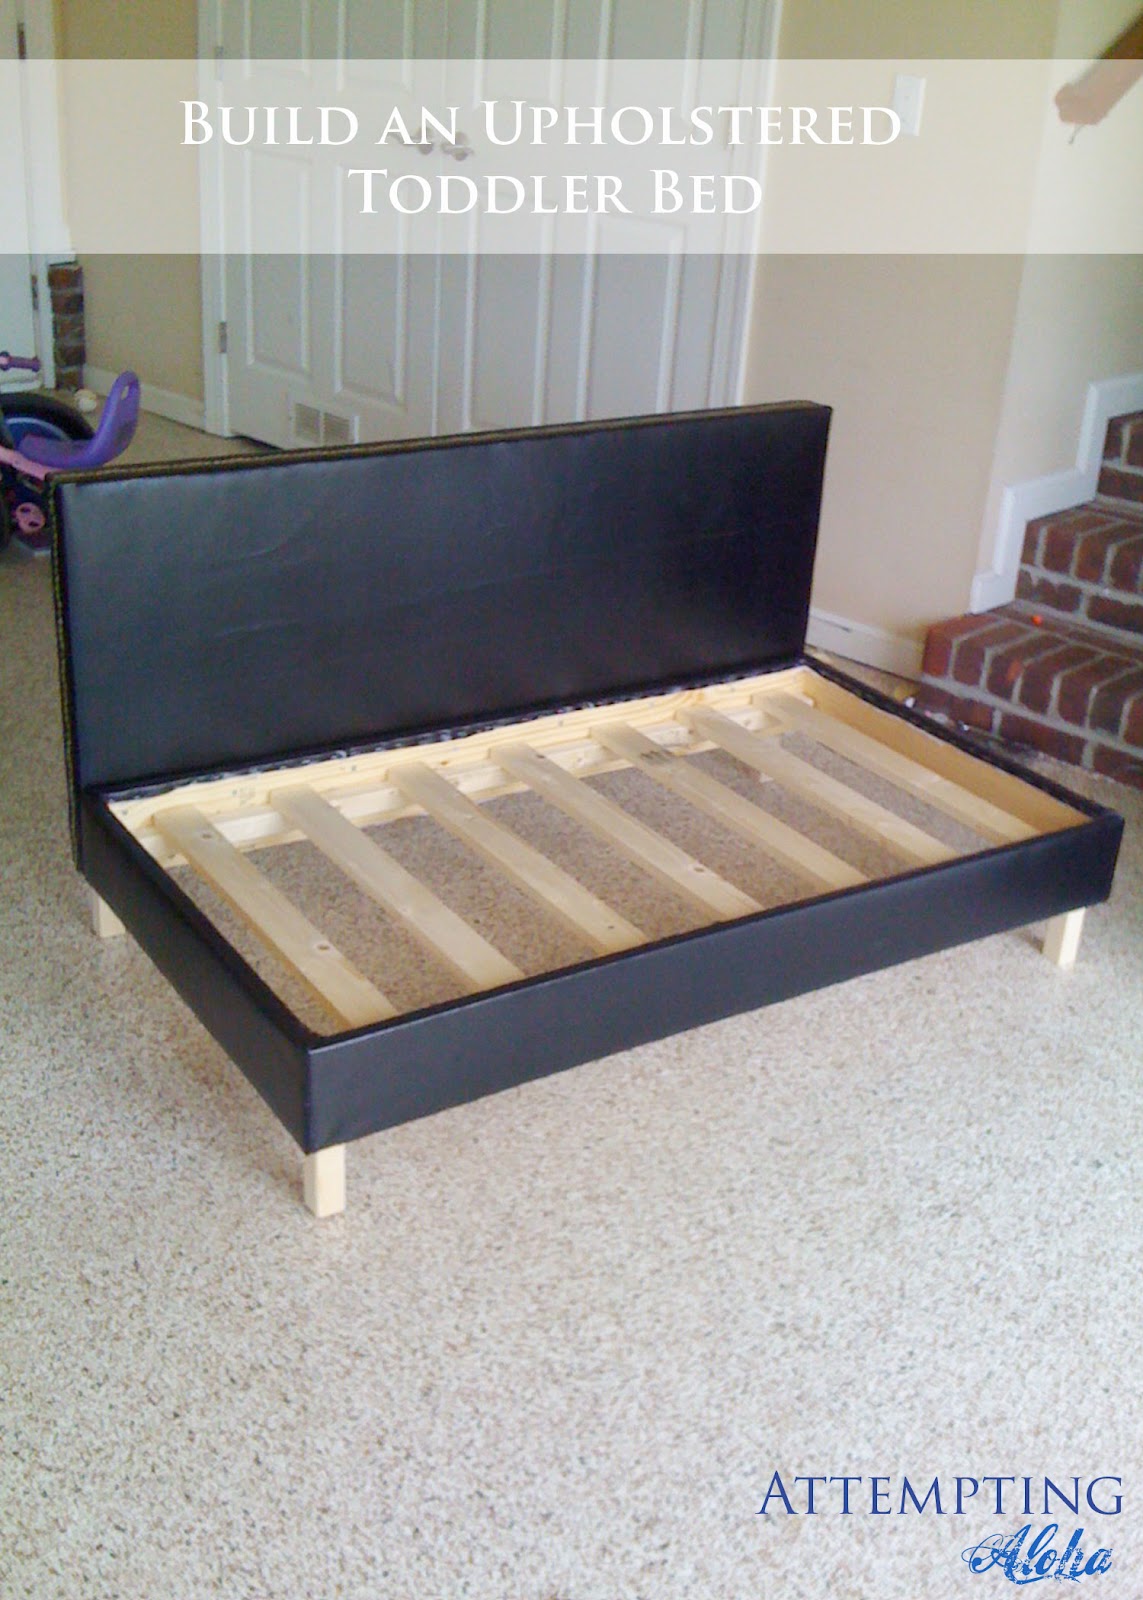 Attempting Aloha: DIY Upholstered Toddler Bed / Couch Plans